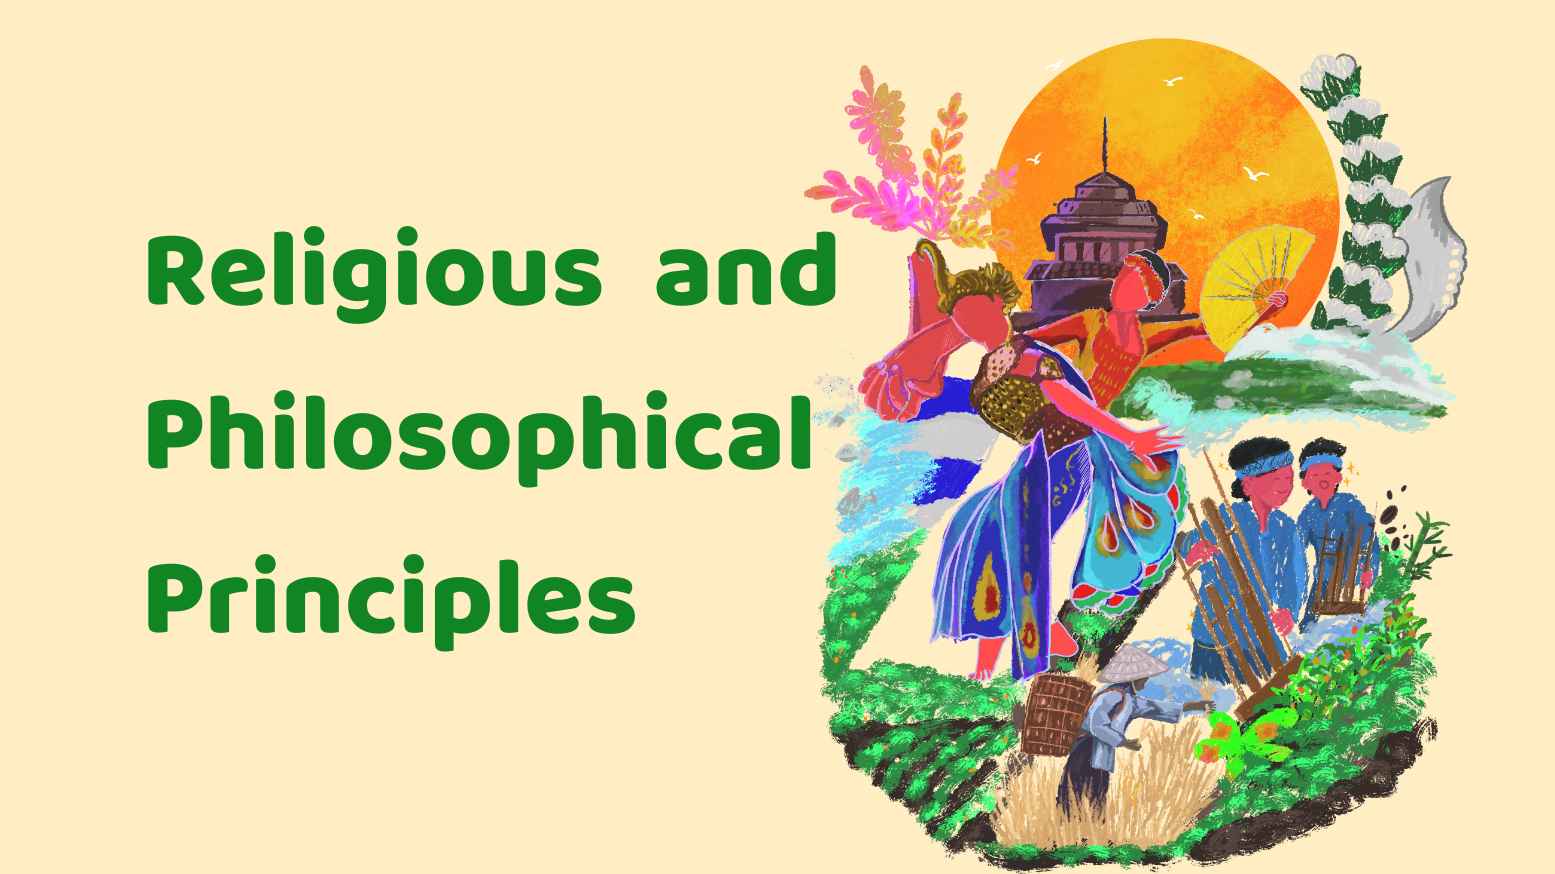 Religious and Philosophical Principles